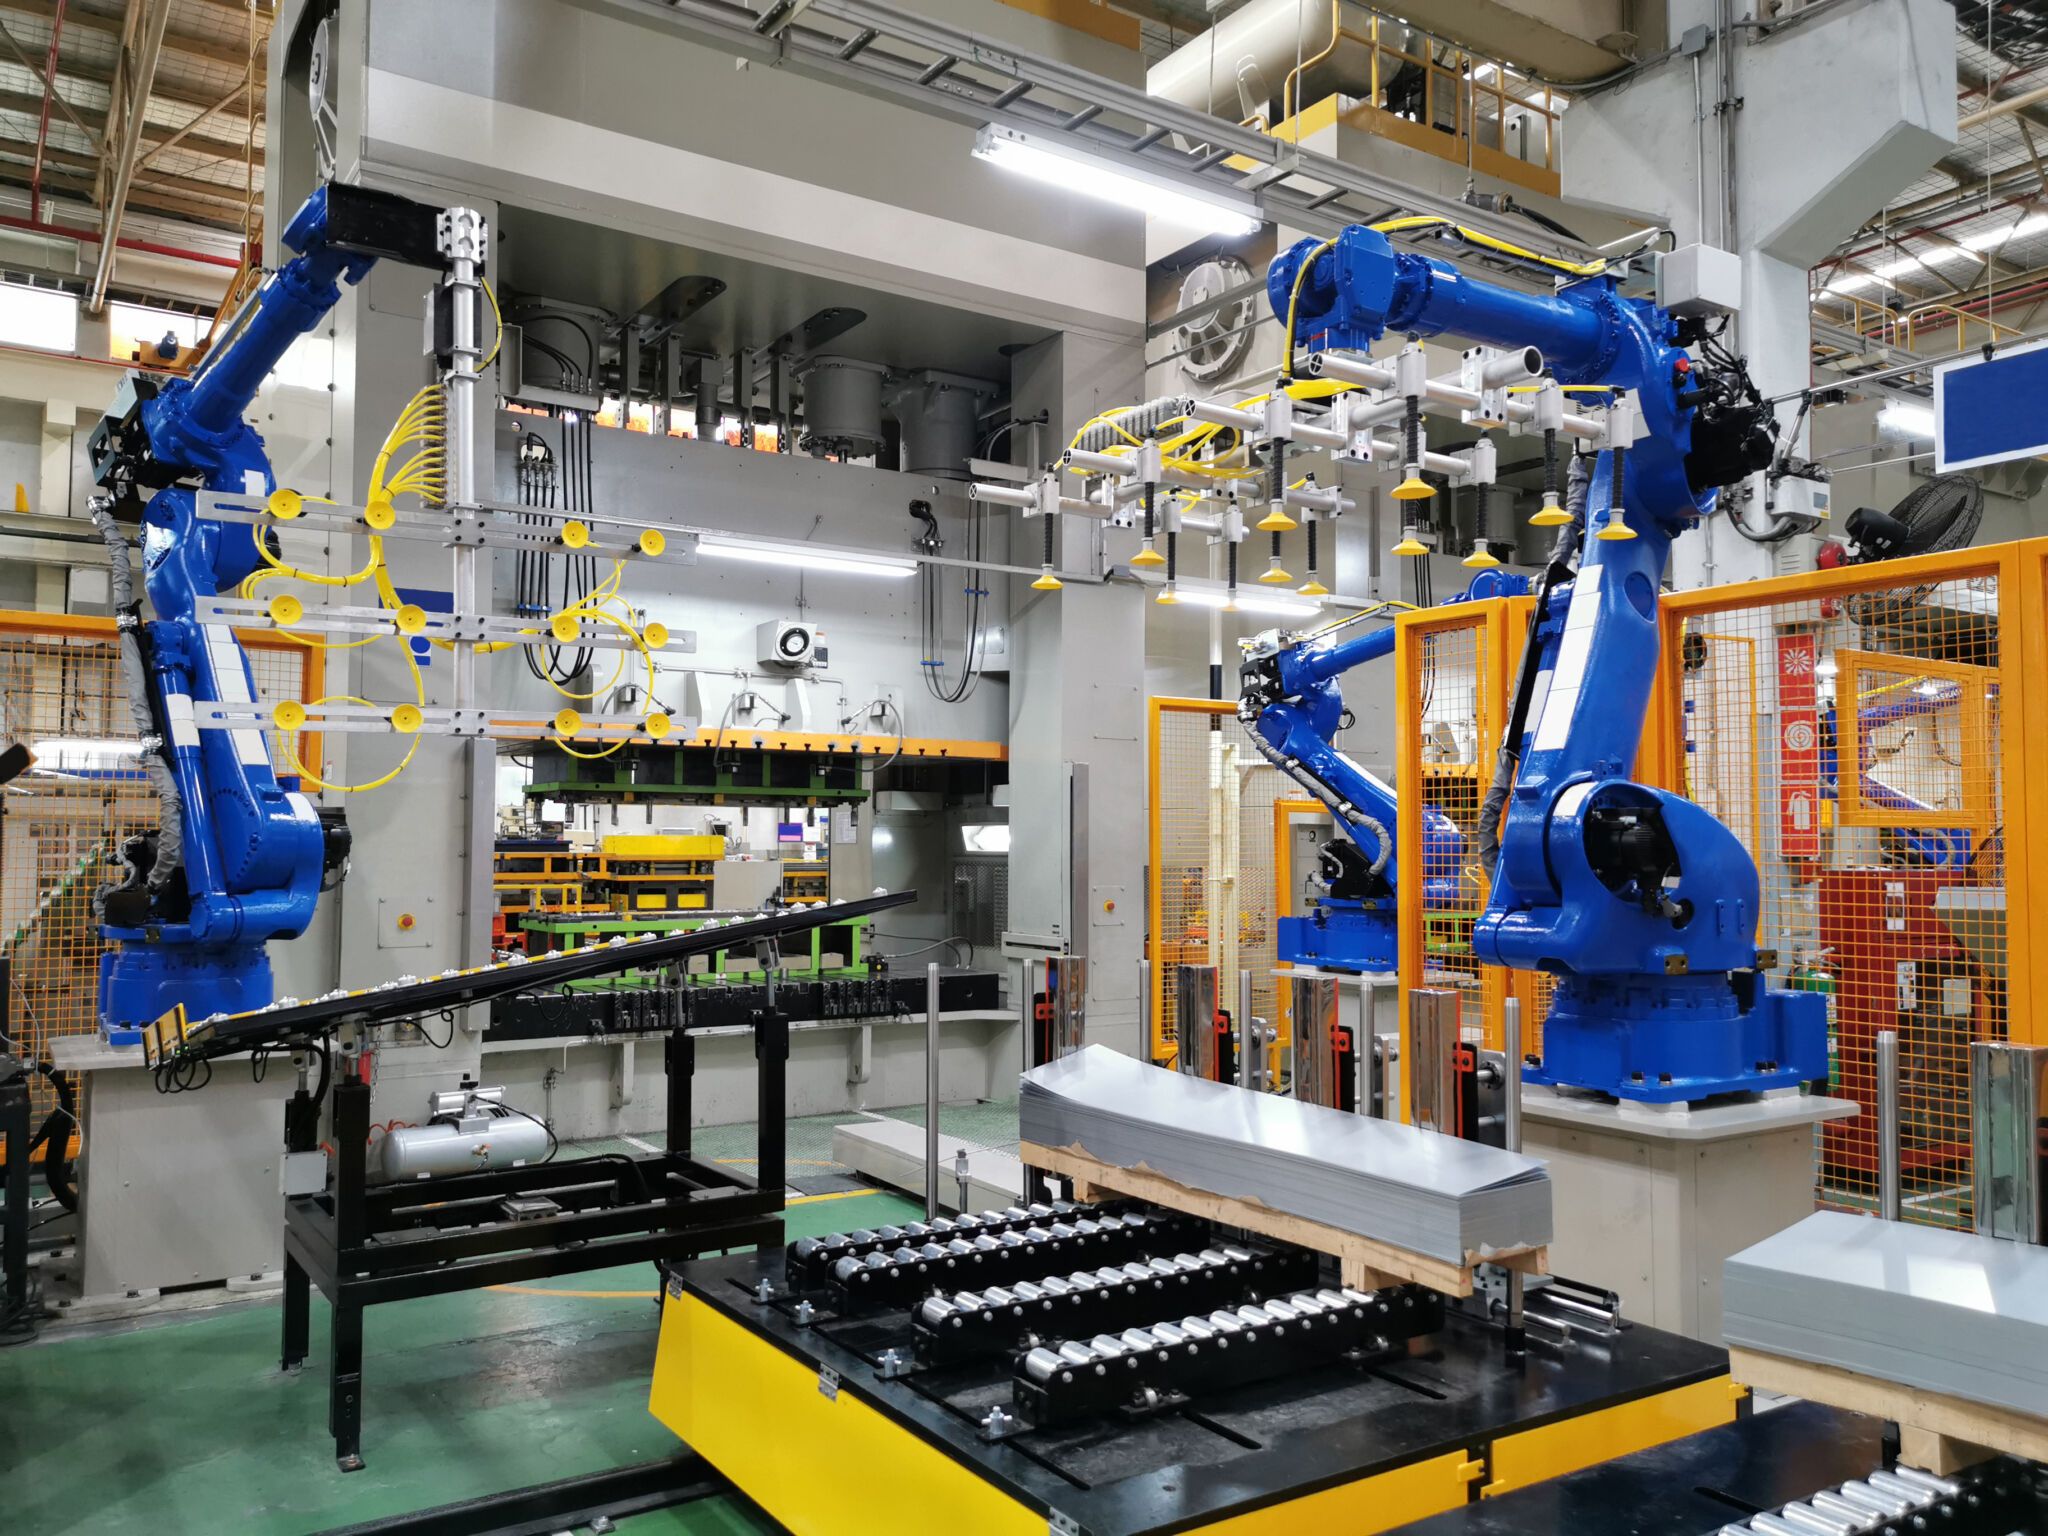 EPCIDO -industrial robot - test run process in assembly factory.